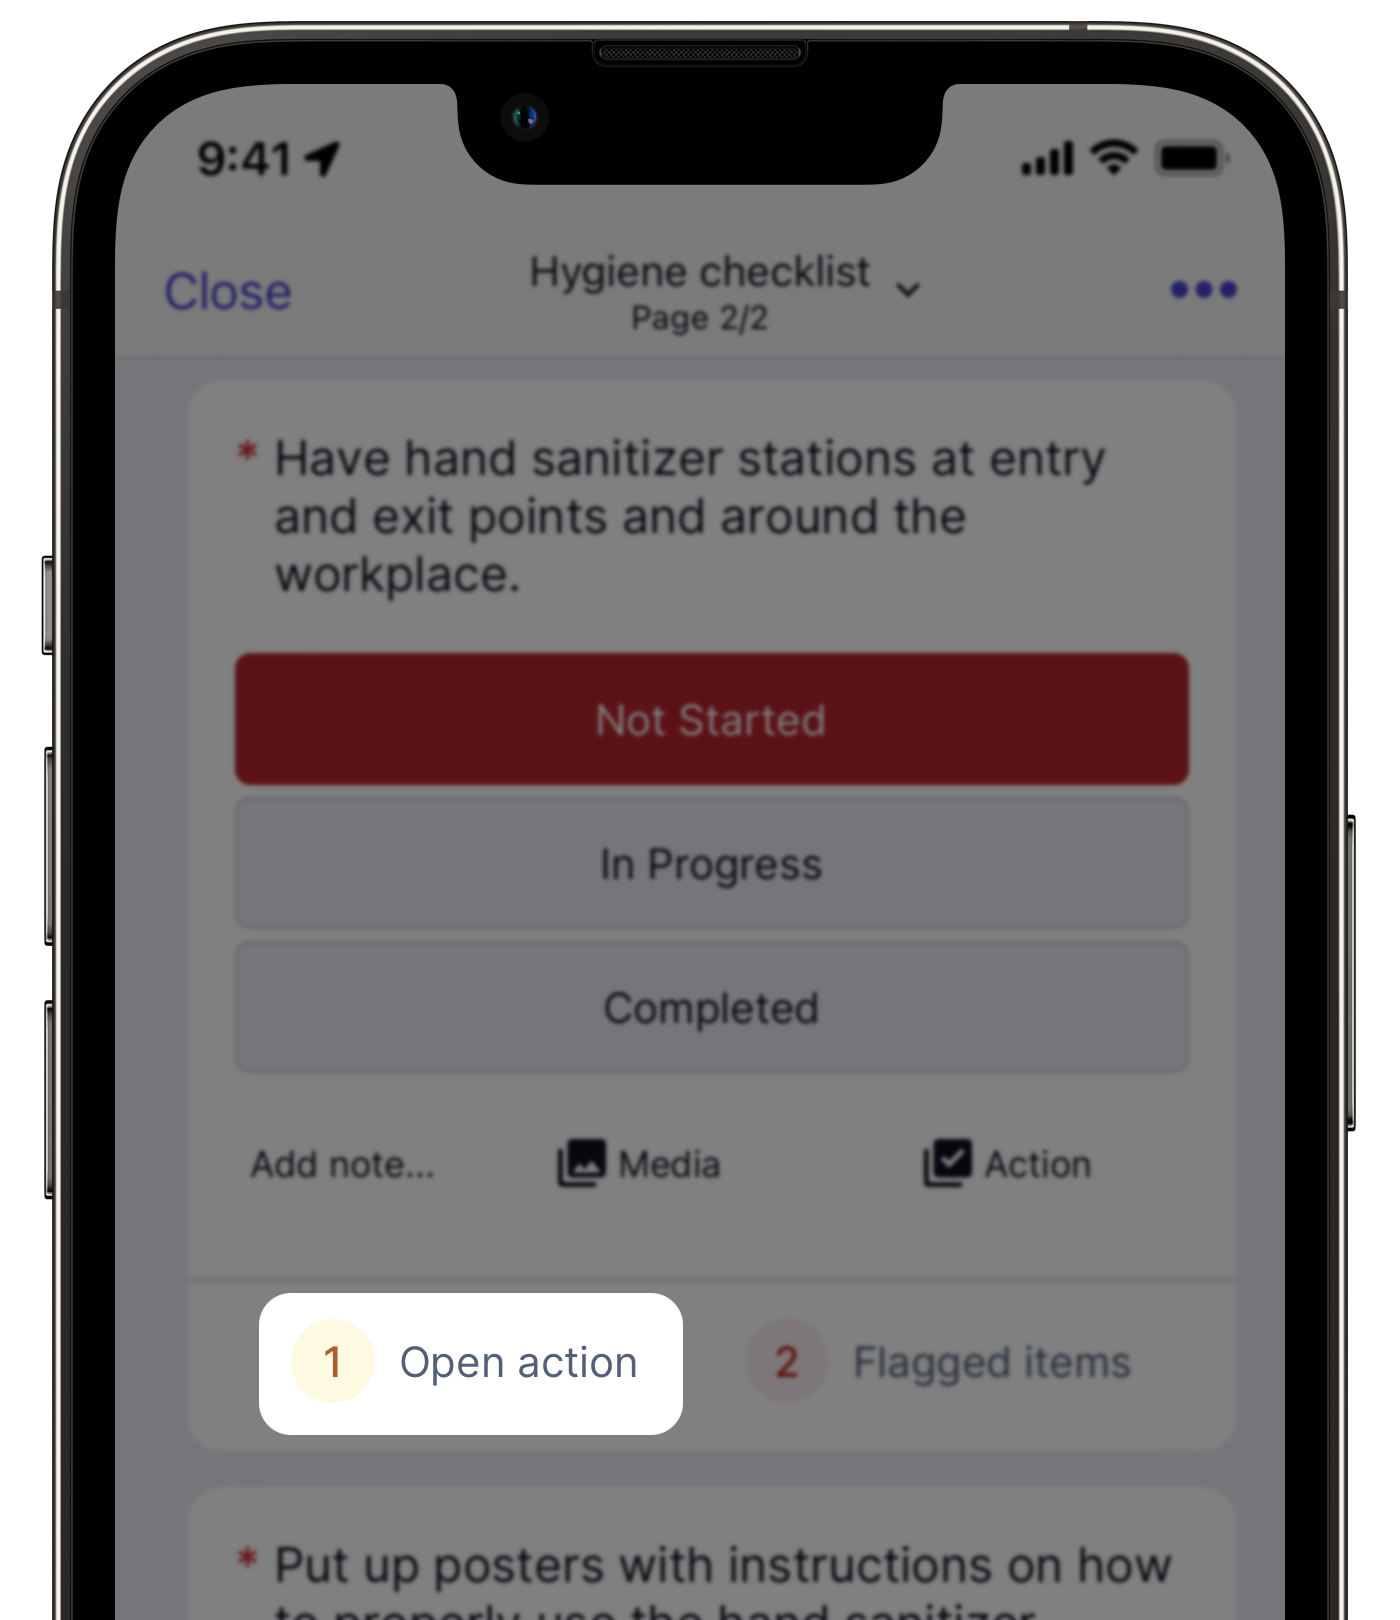 View open actions related to an inspection question via the mobile app.